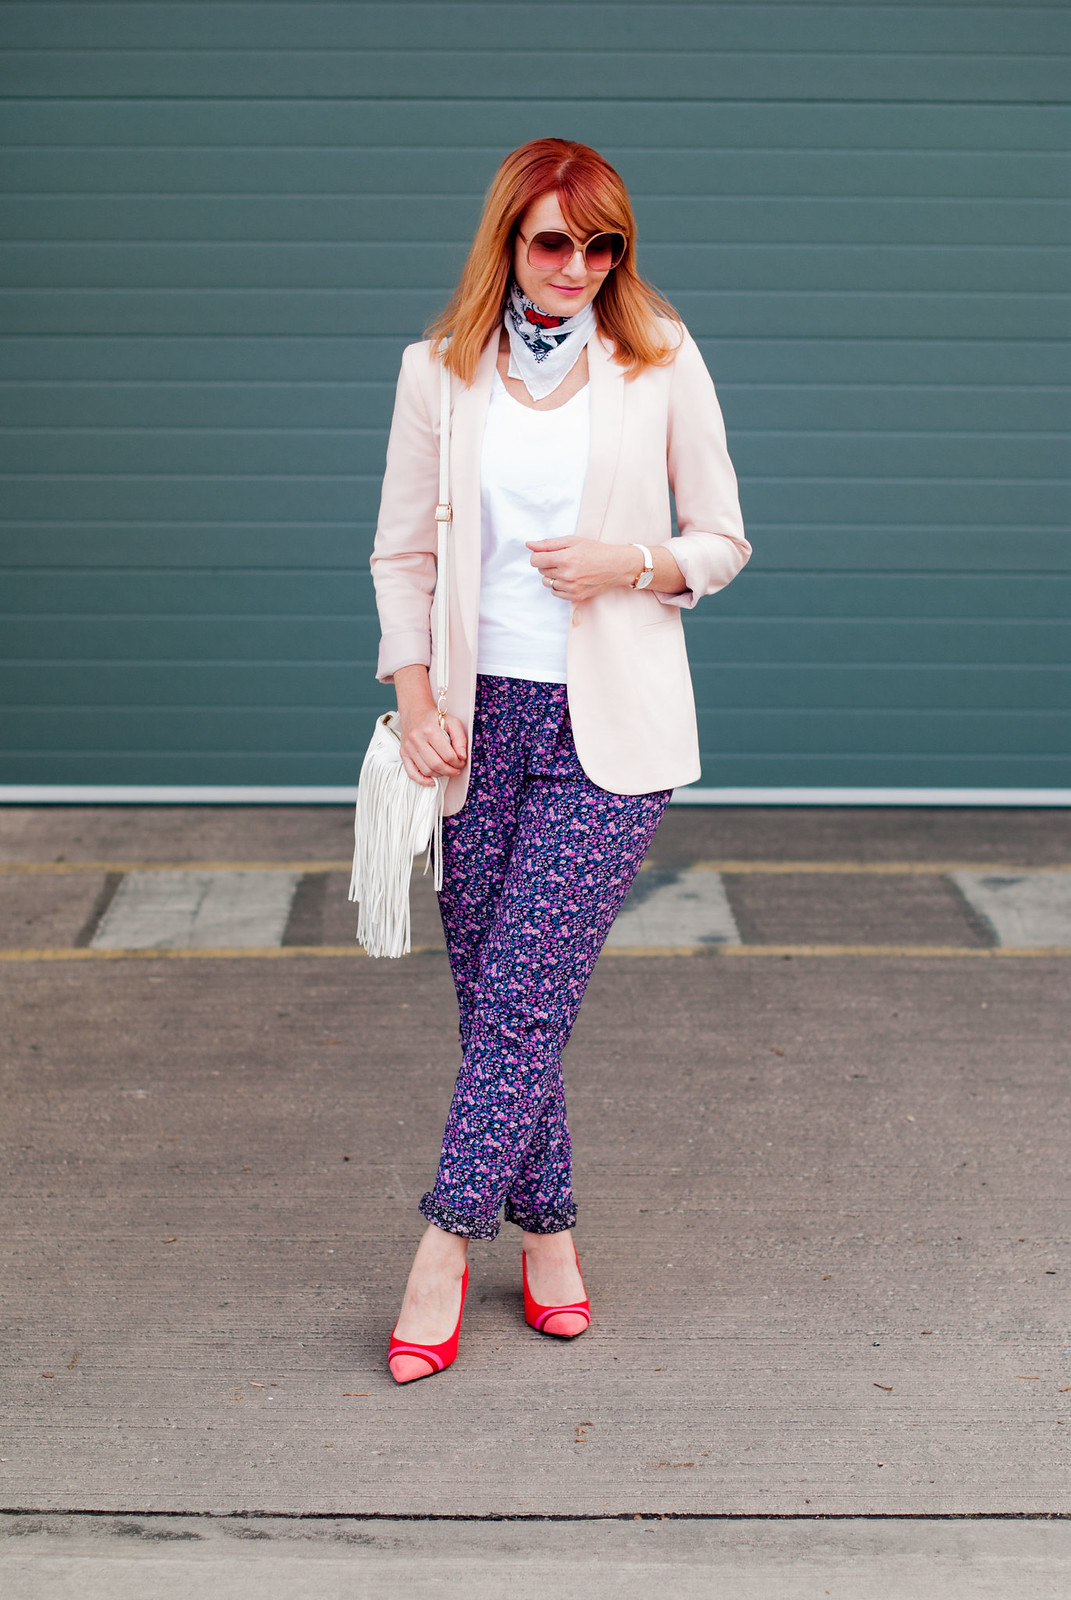 Summer dressing for cooler days: Pale pink blazer loose floral trousers red striped block heel shoes neck scarf white fringe cross body bag | Not Dressed As Lamb, over 40 style